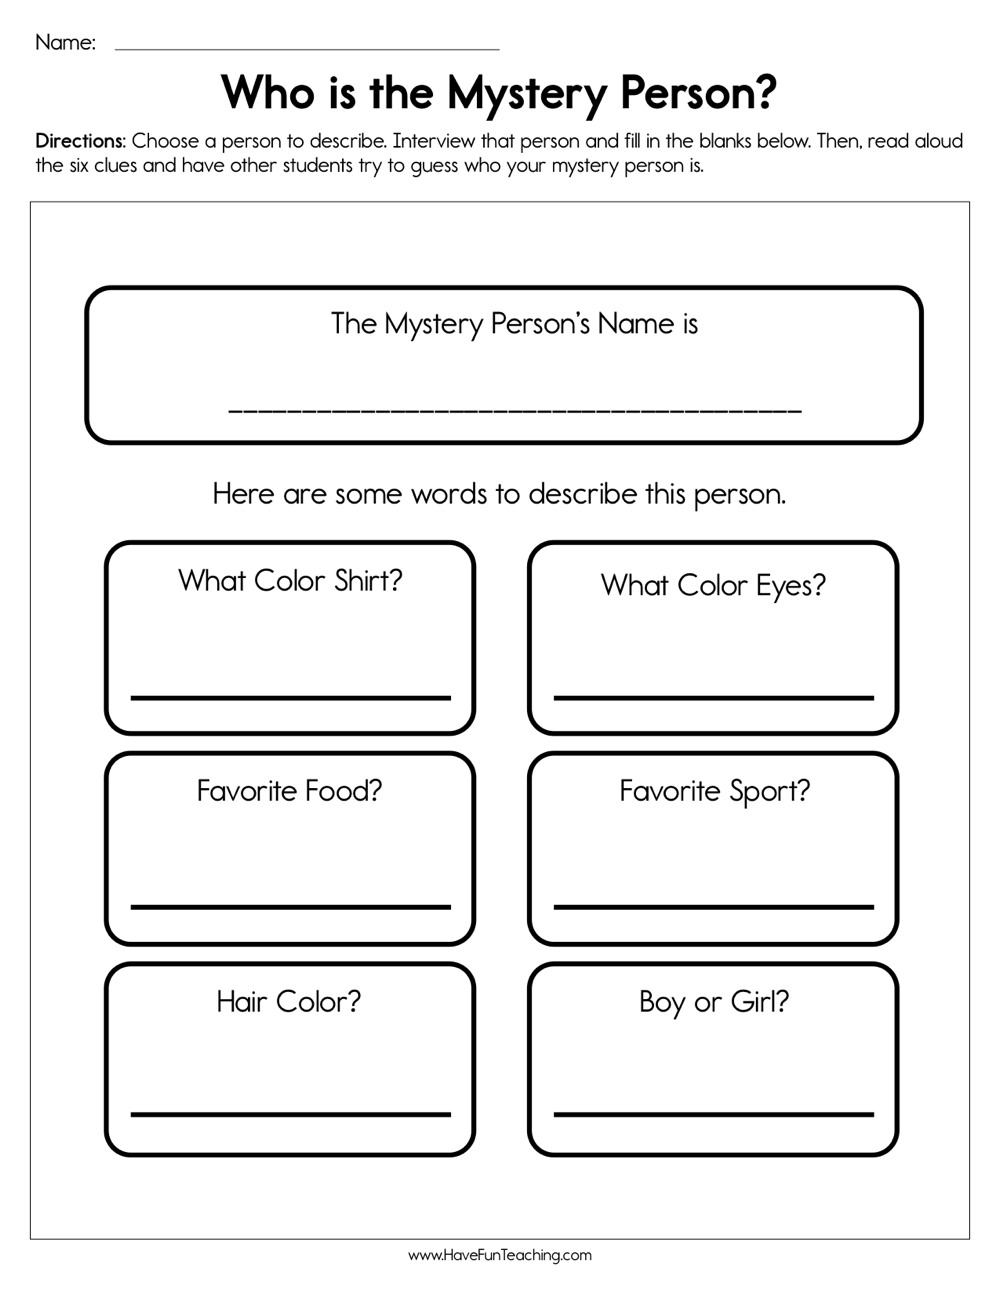 who-is-the-mystery-person-worksheet-have-fun-teaching-db-excel